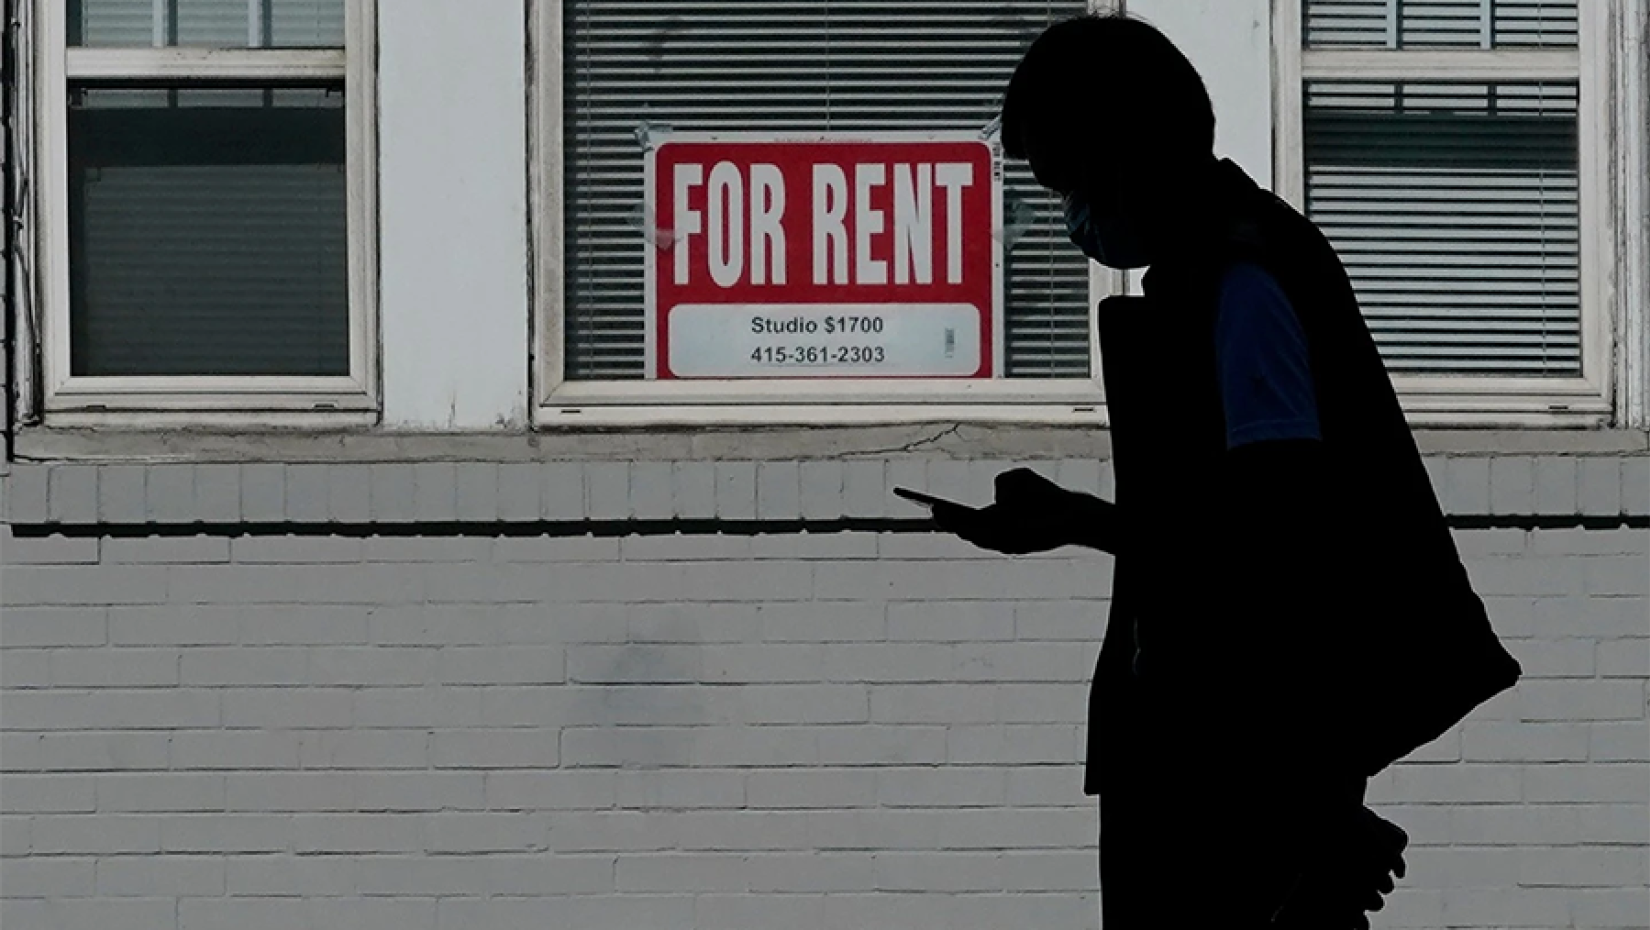 Profile of a person in shadow looking at their cellphone with a grey building in the background displaying a For Rent sign